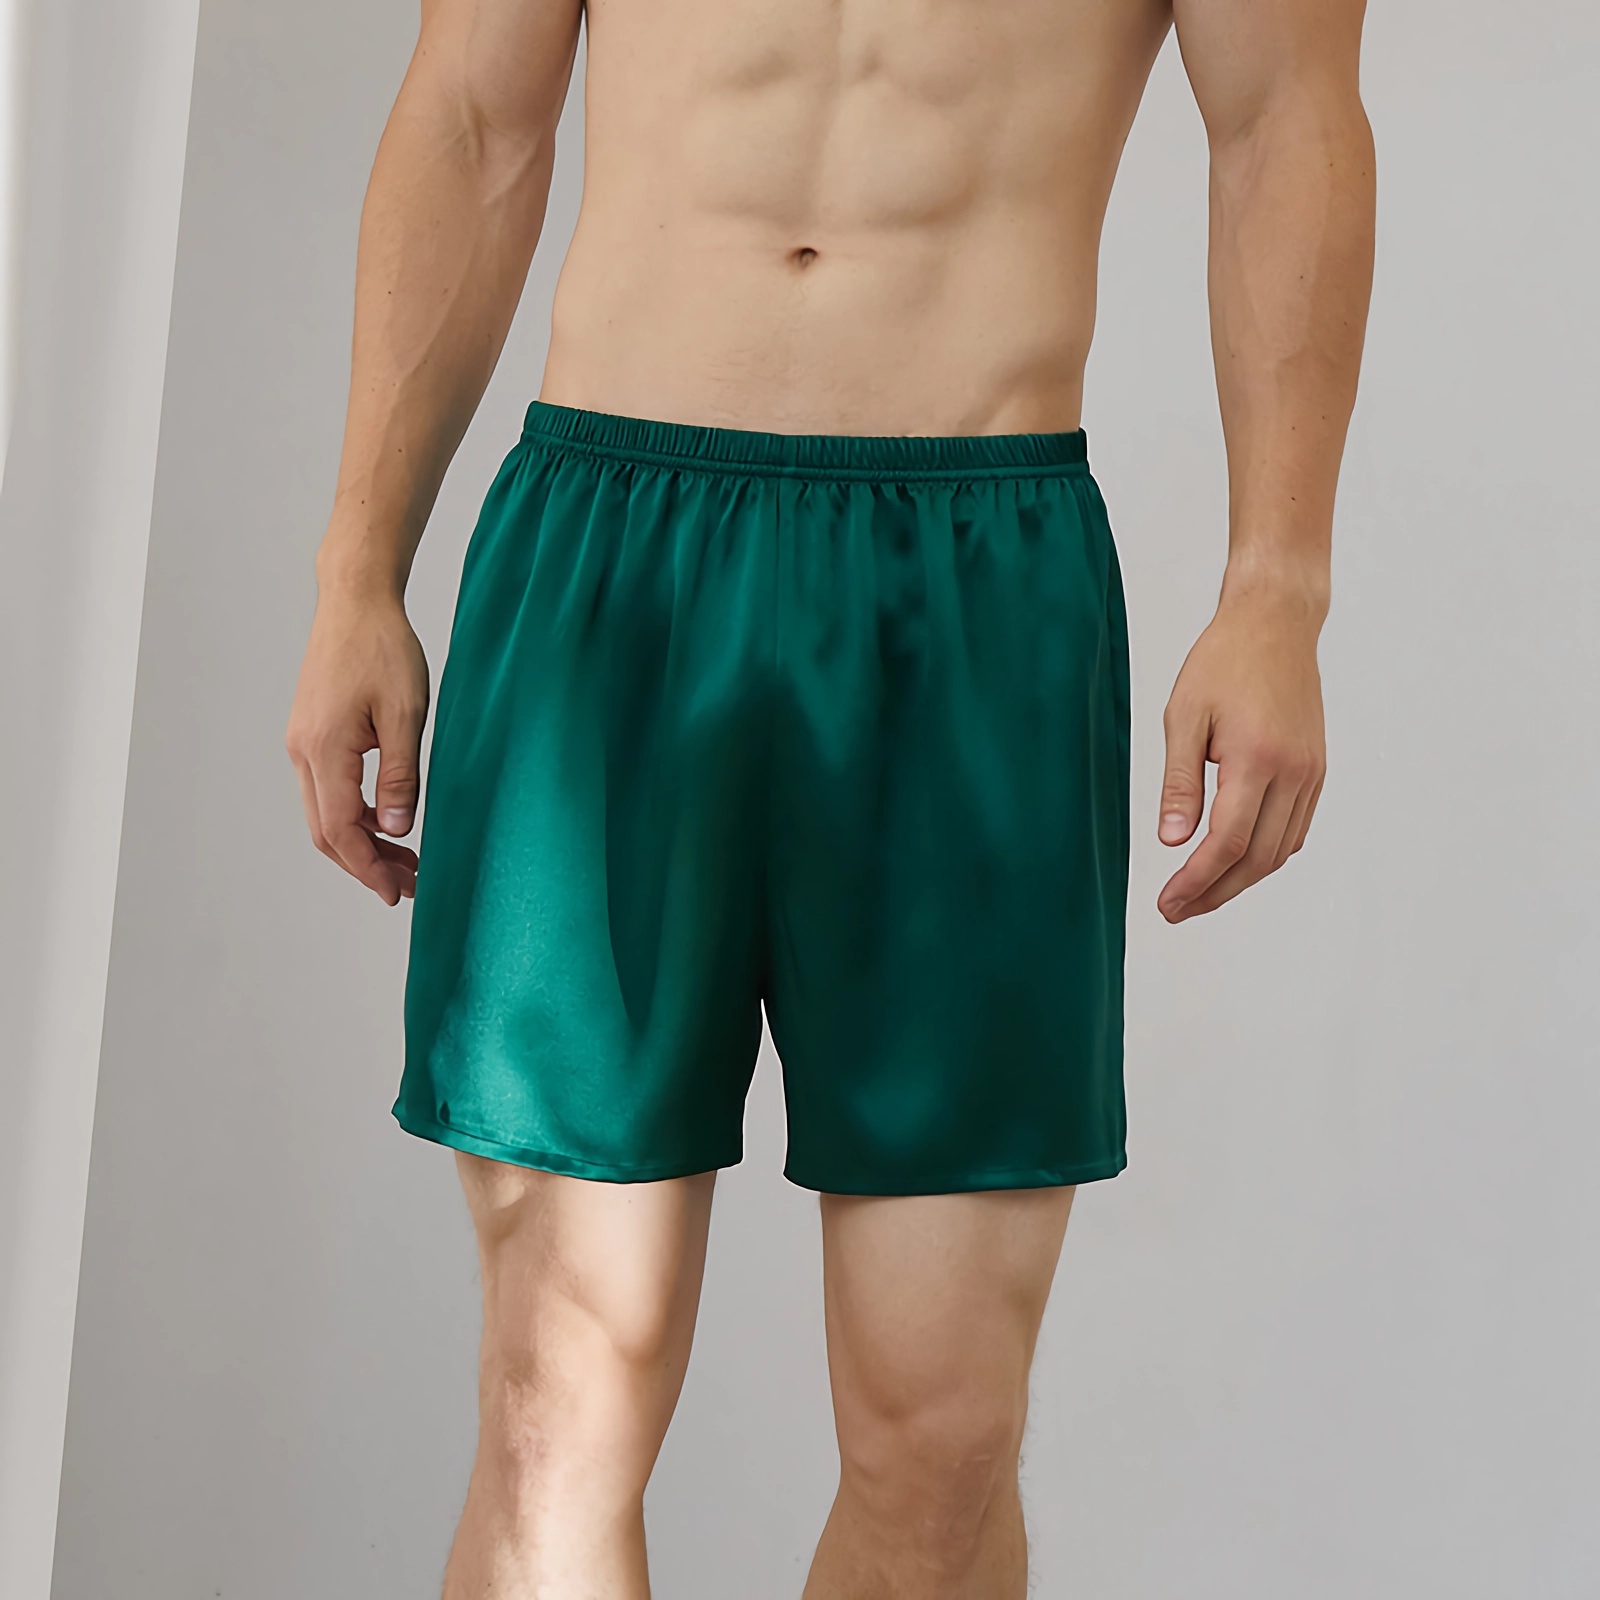 19 Momme Classic Men's Silk Boxers REAL SILK LIFE